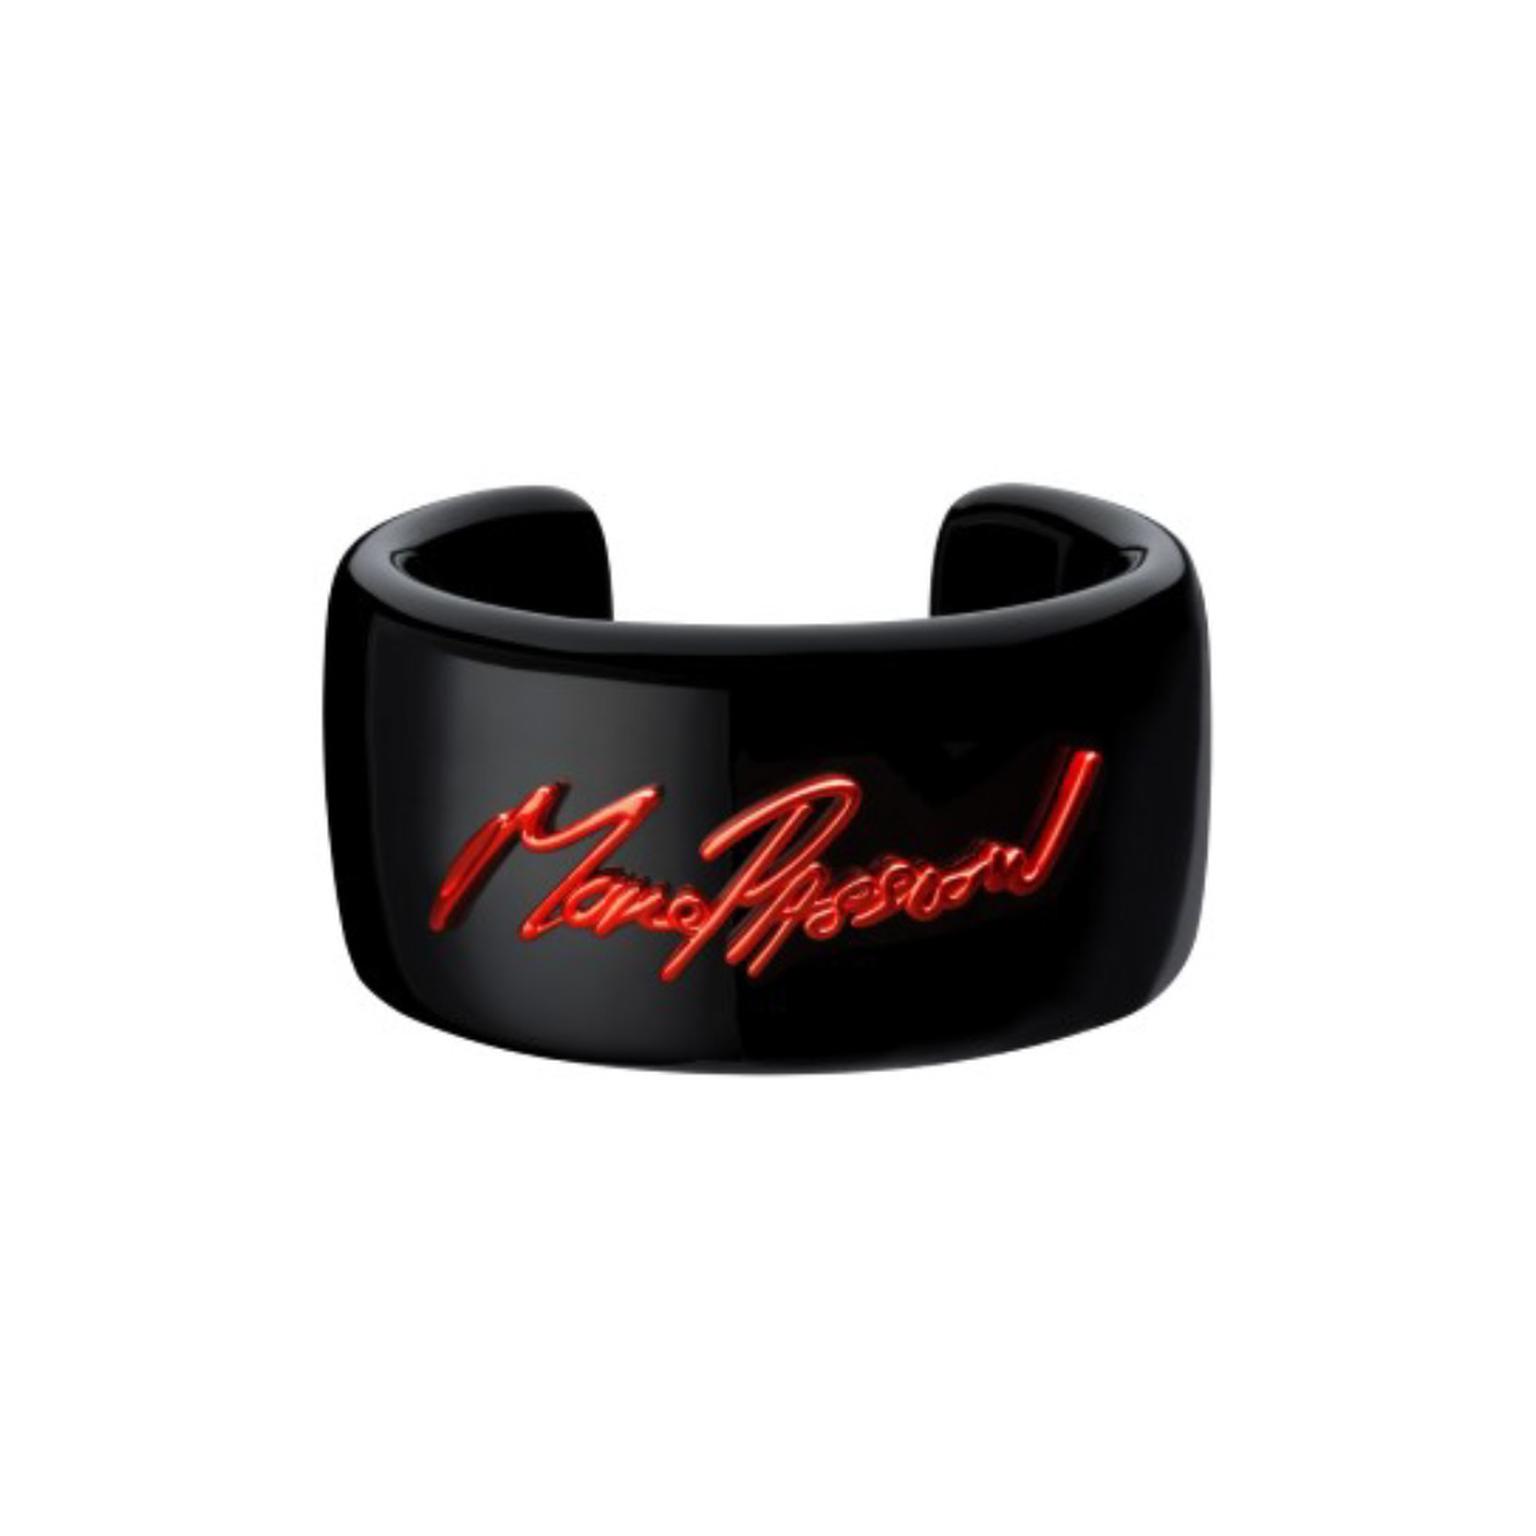 Stephen Webster x Tracey Emin More Passion cuff for (RED)